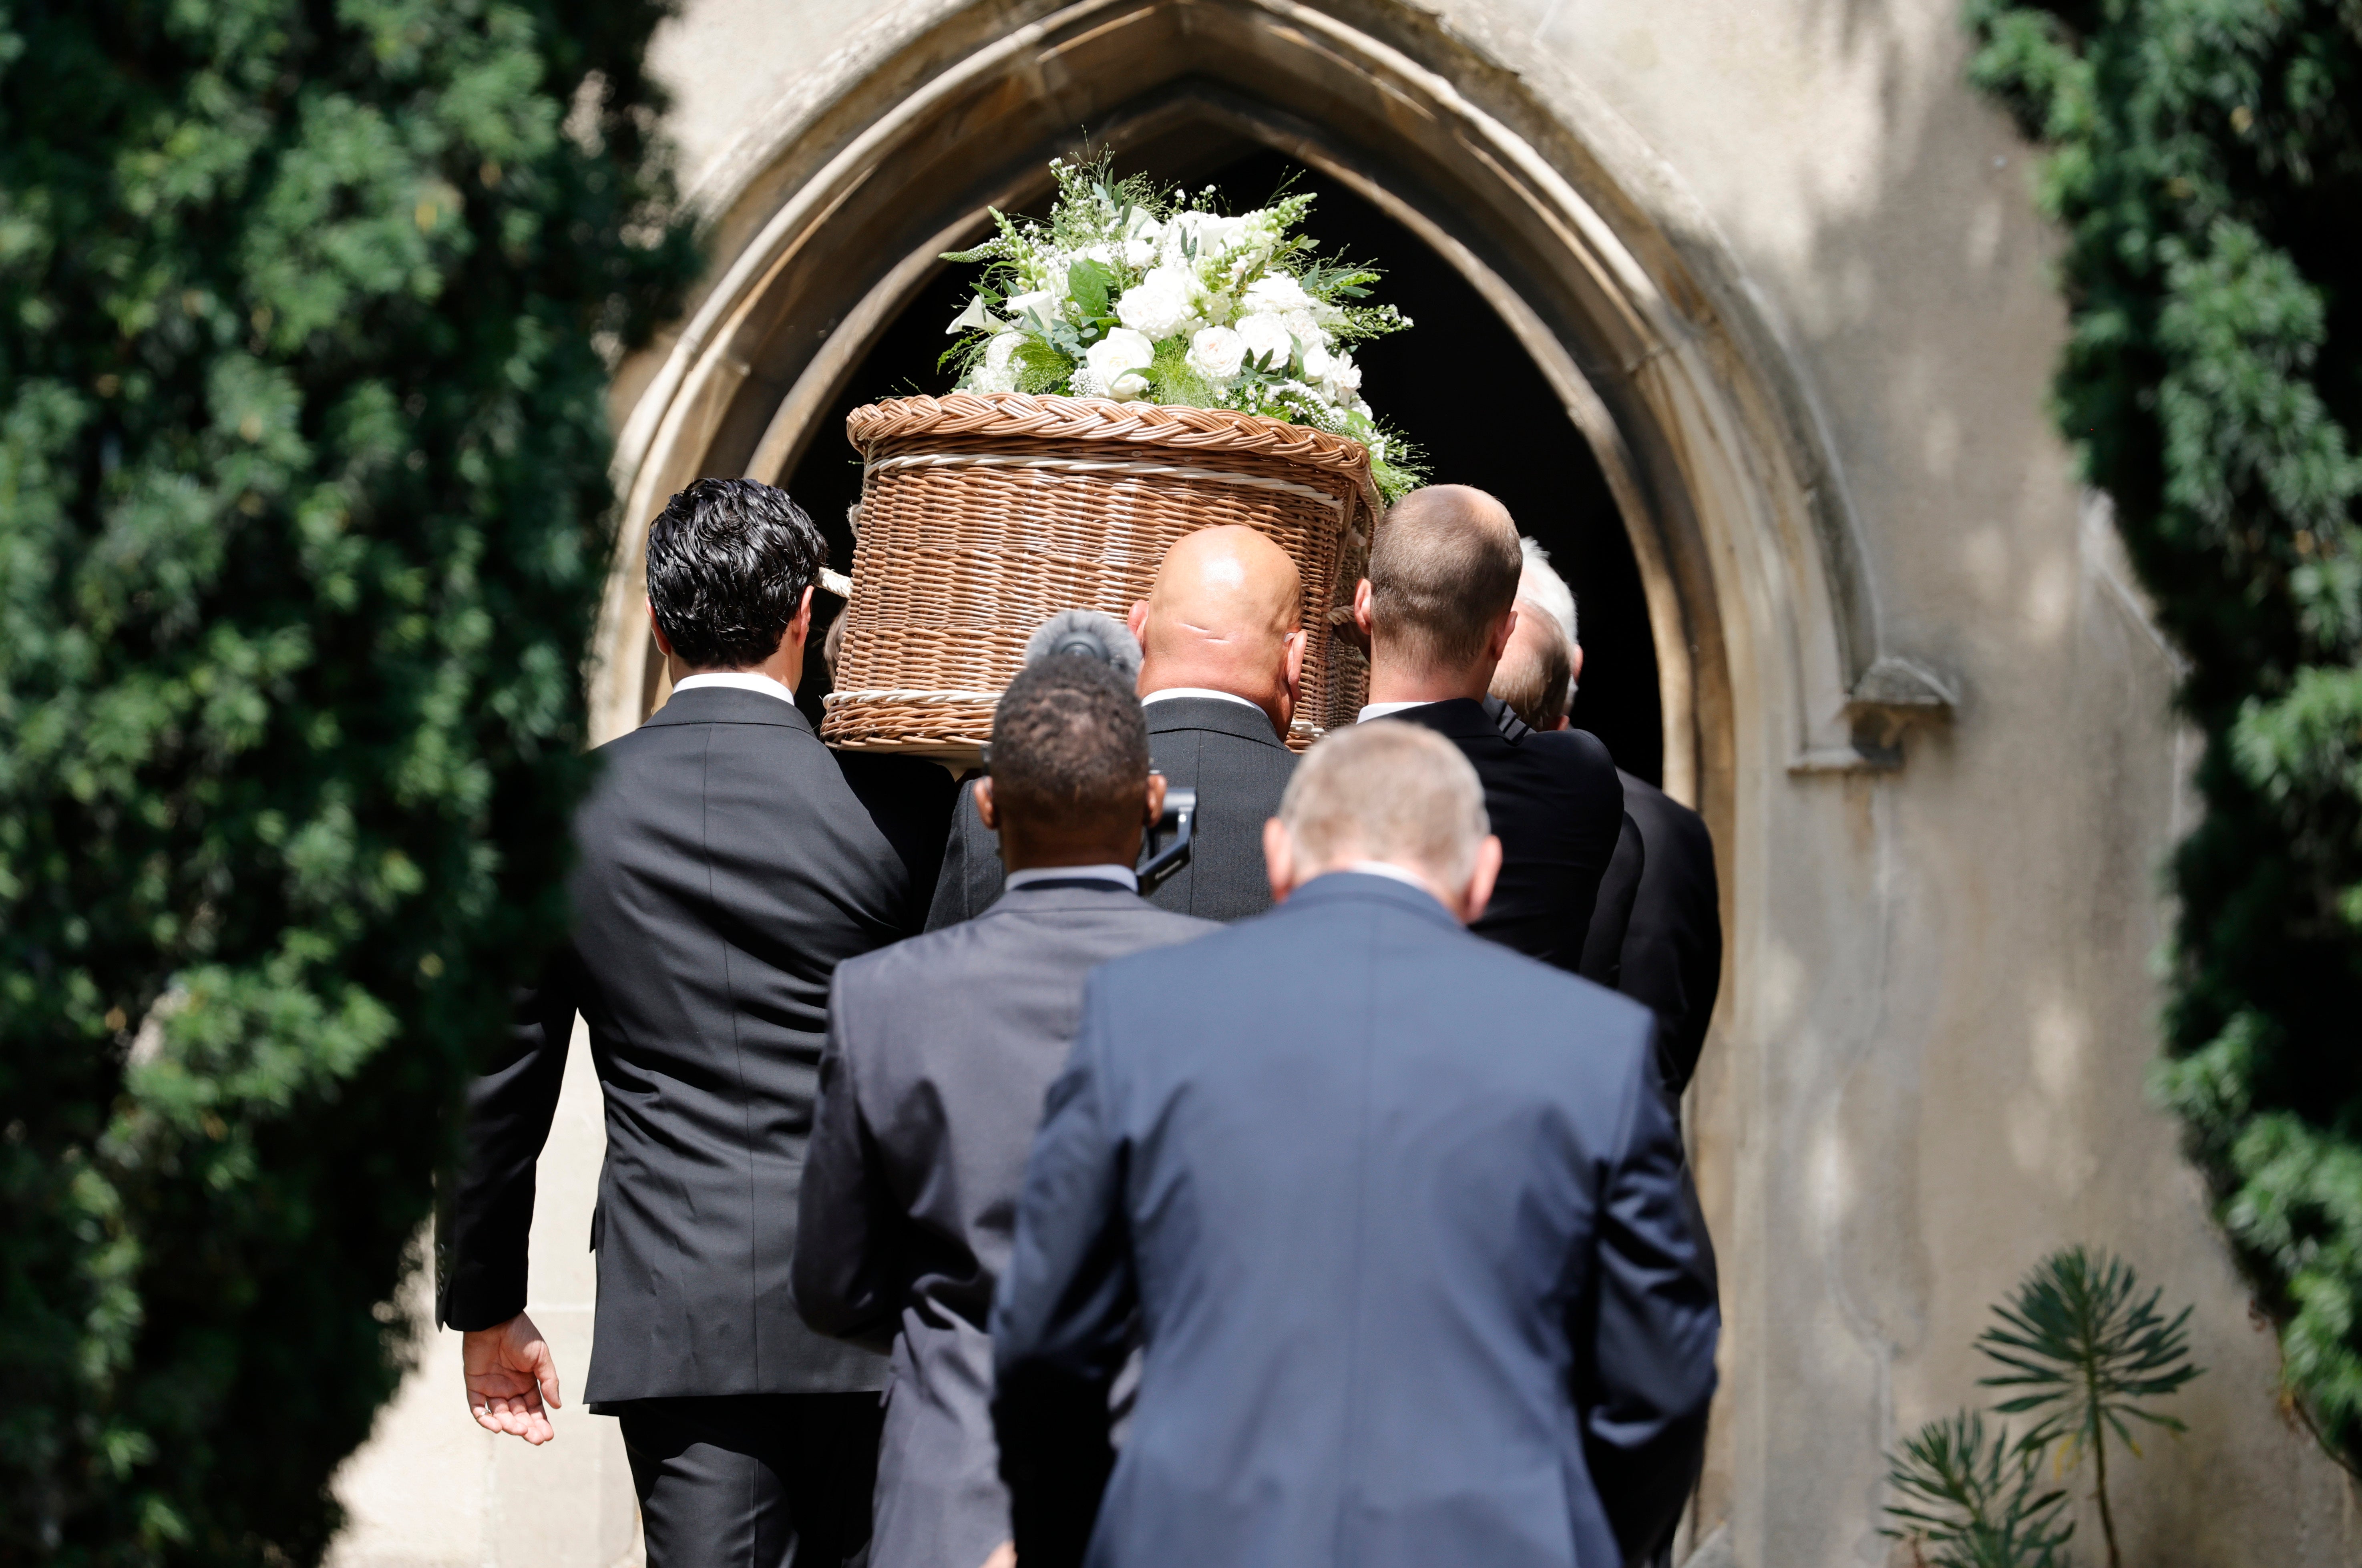 The coffin is carried into the church by pallbearers during the funeral of Dame Deborah James